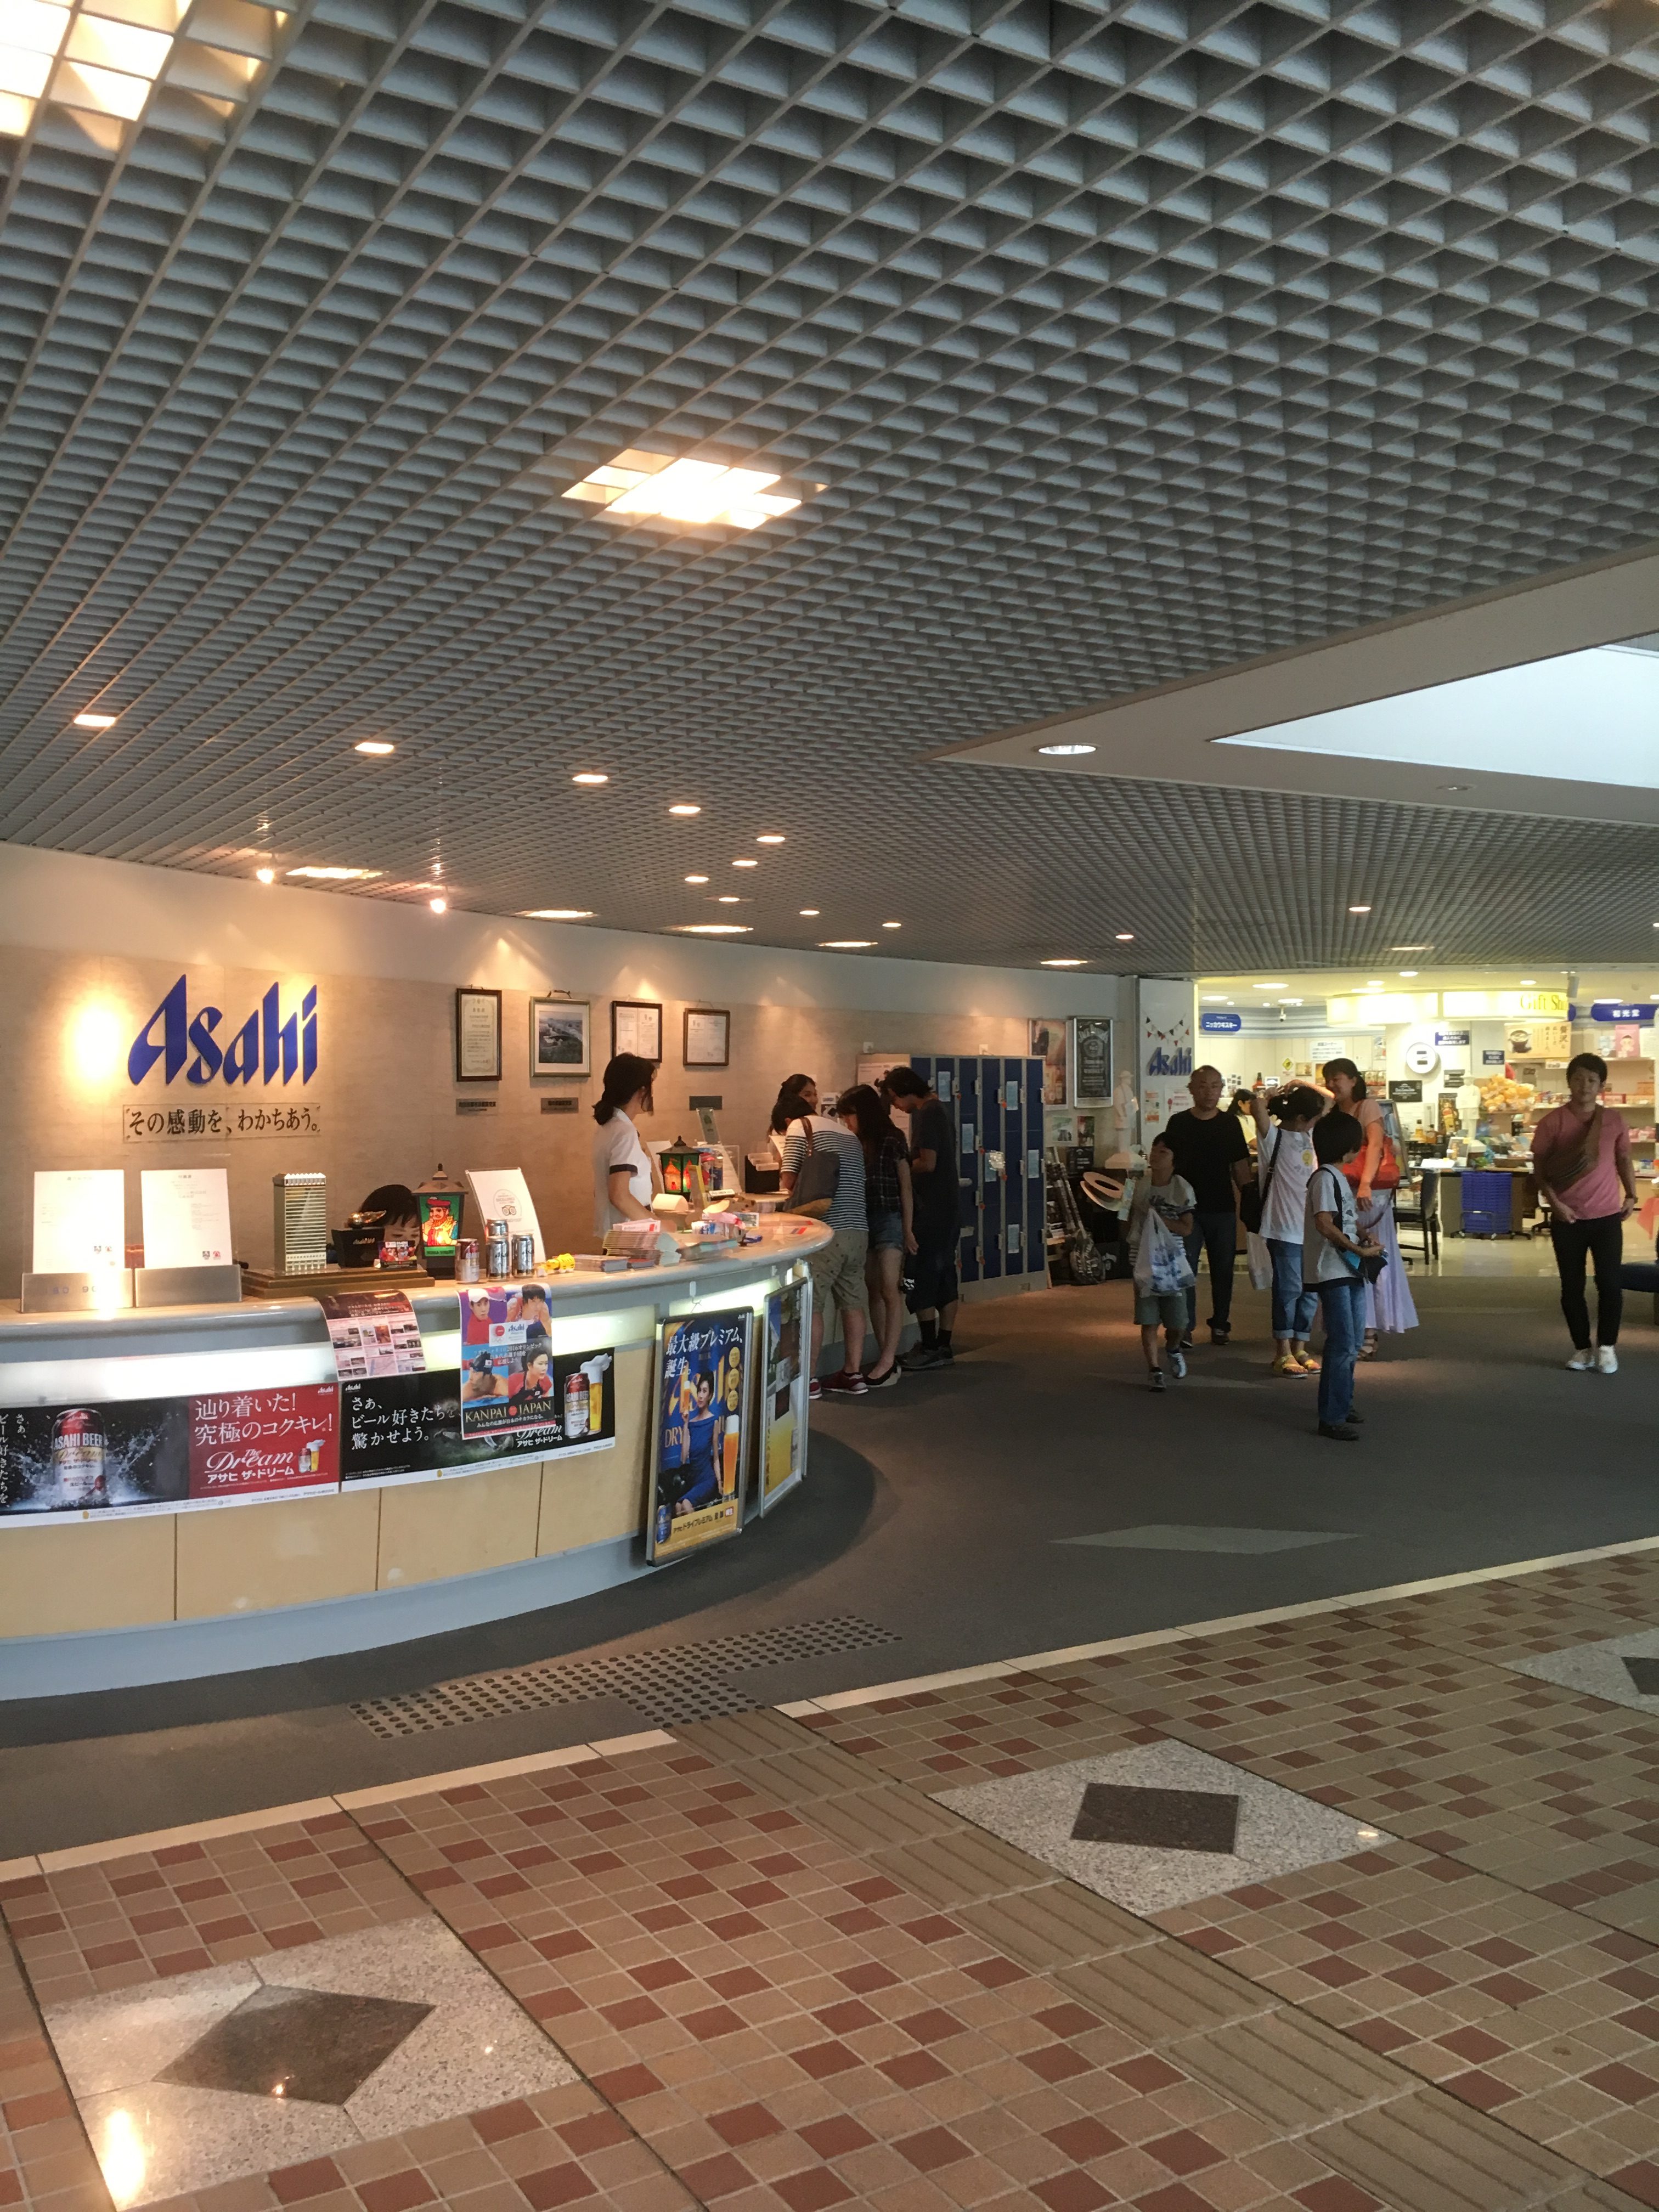 reception and gift shop in the Asahi beer suita factory